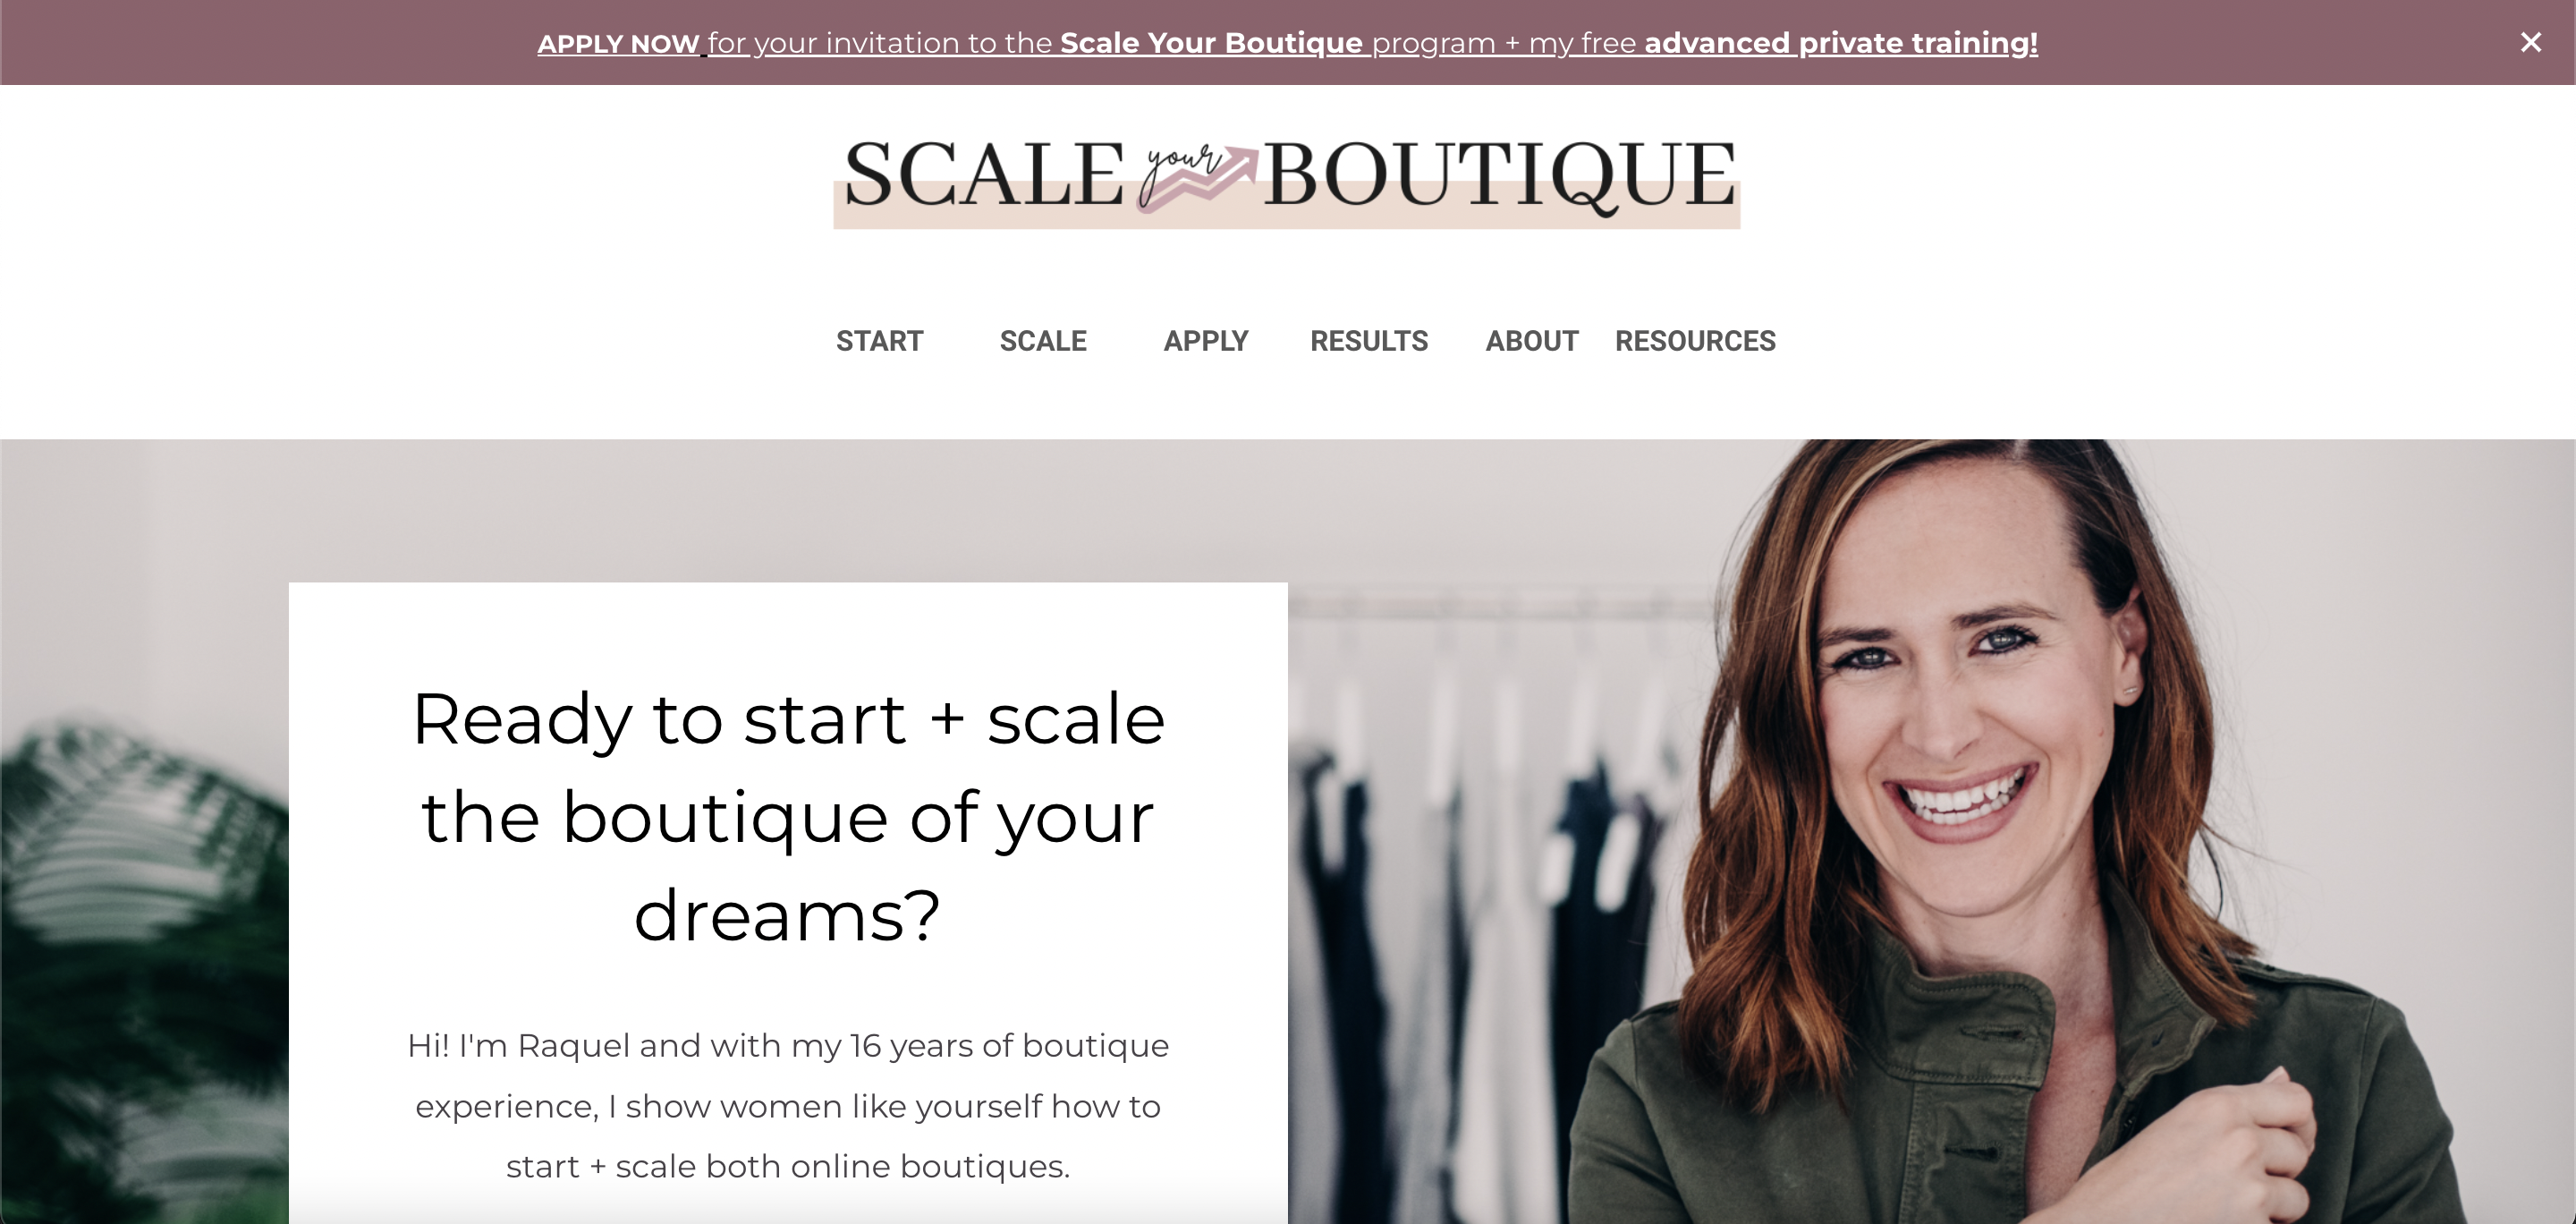 Start A Boutique home page